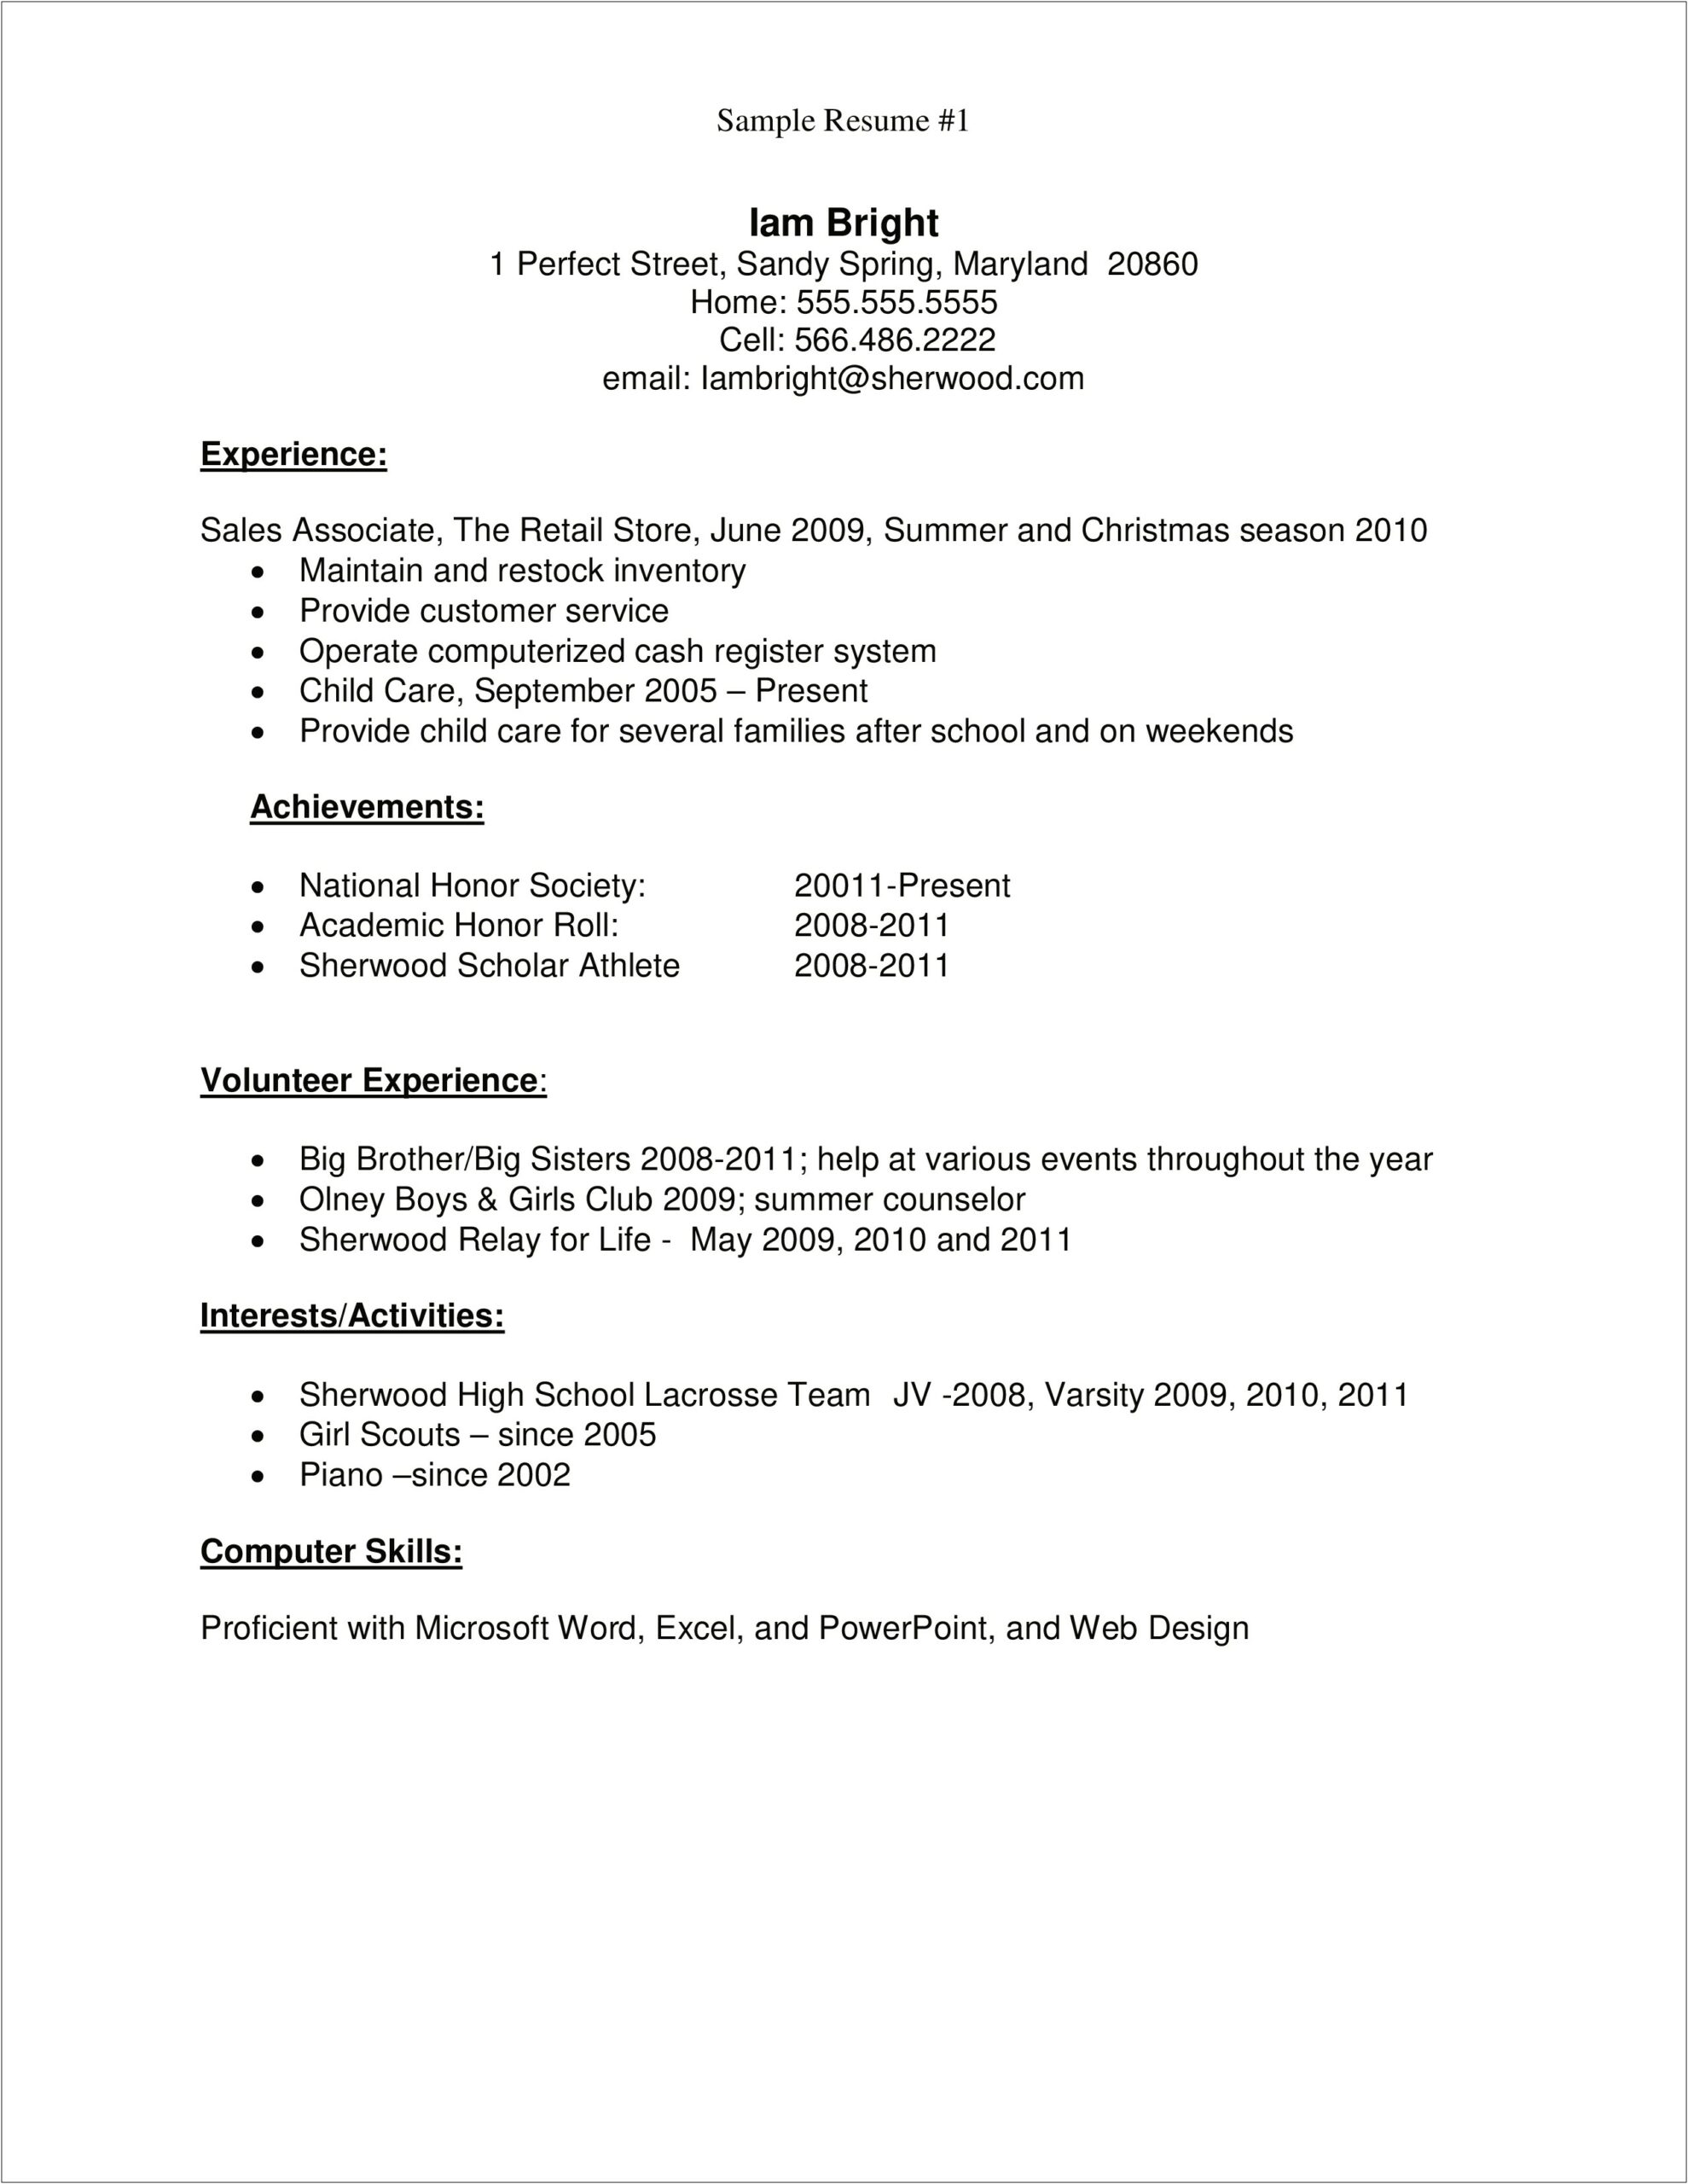 Free Sample Resume For High School Student